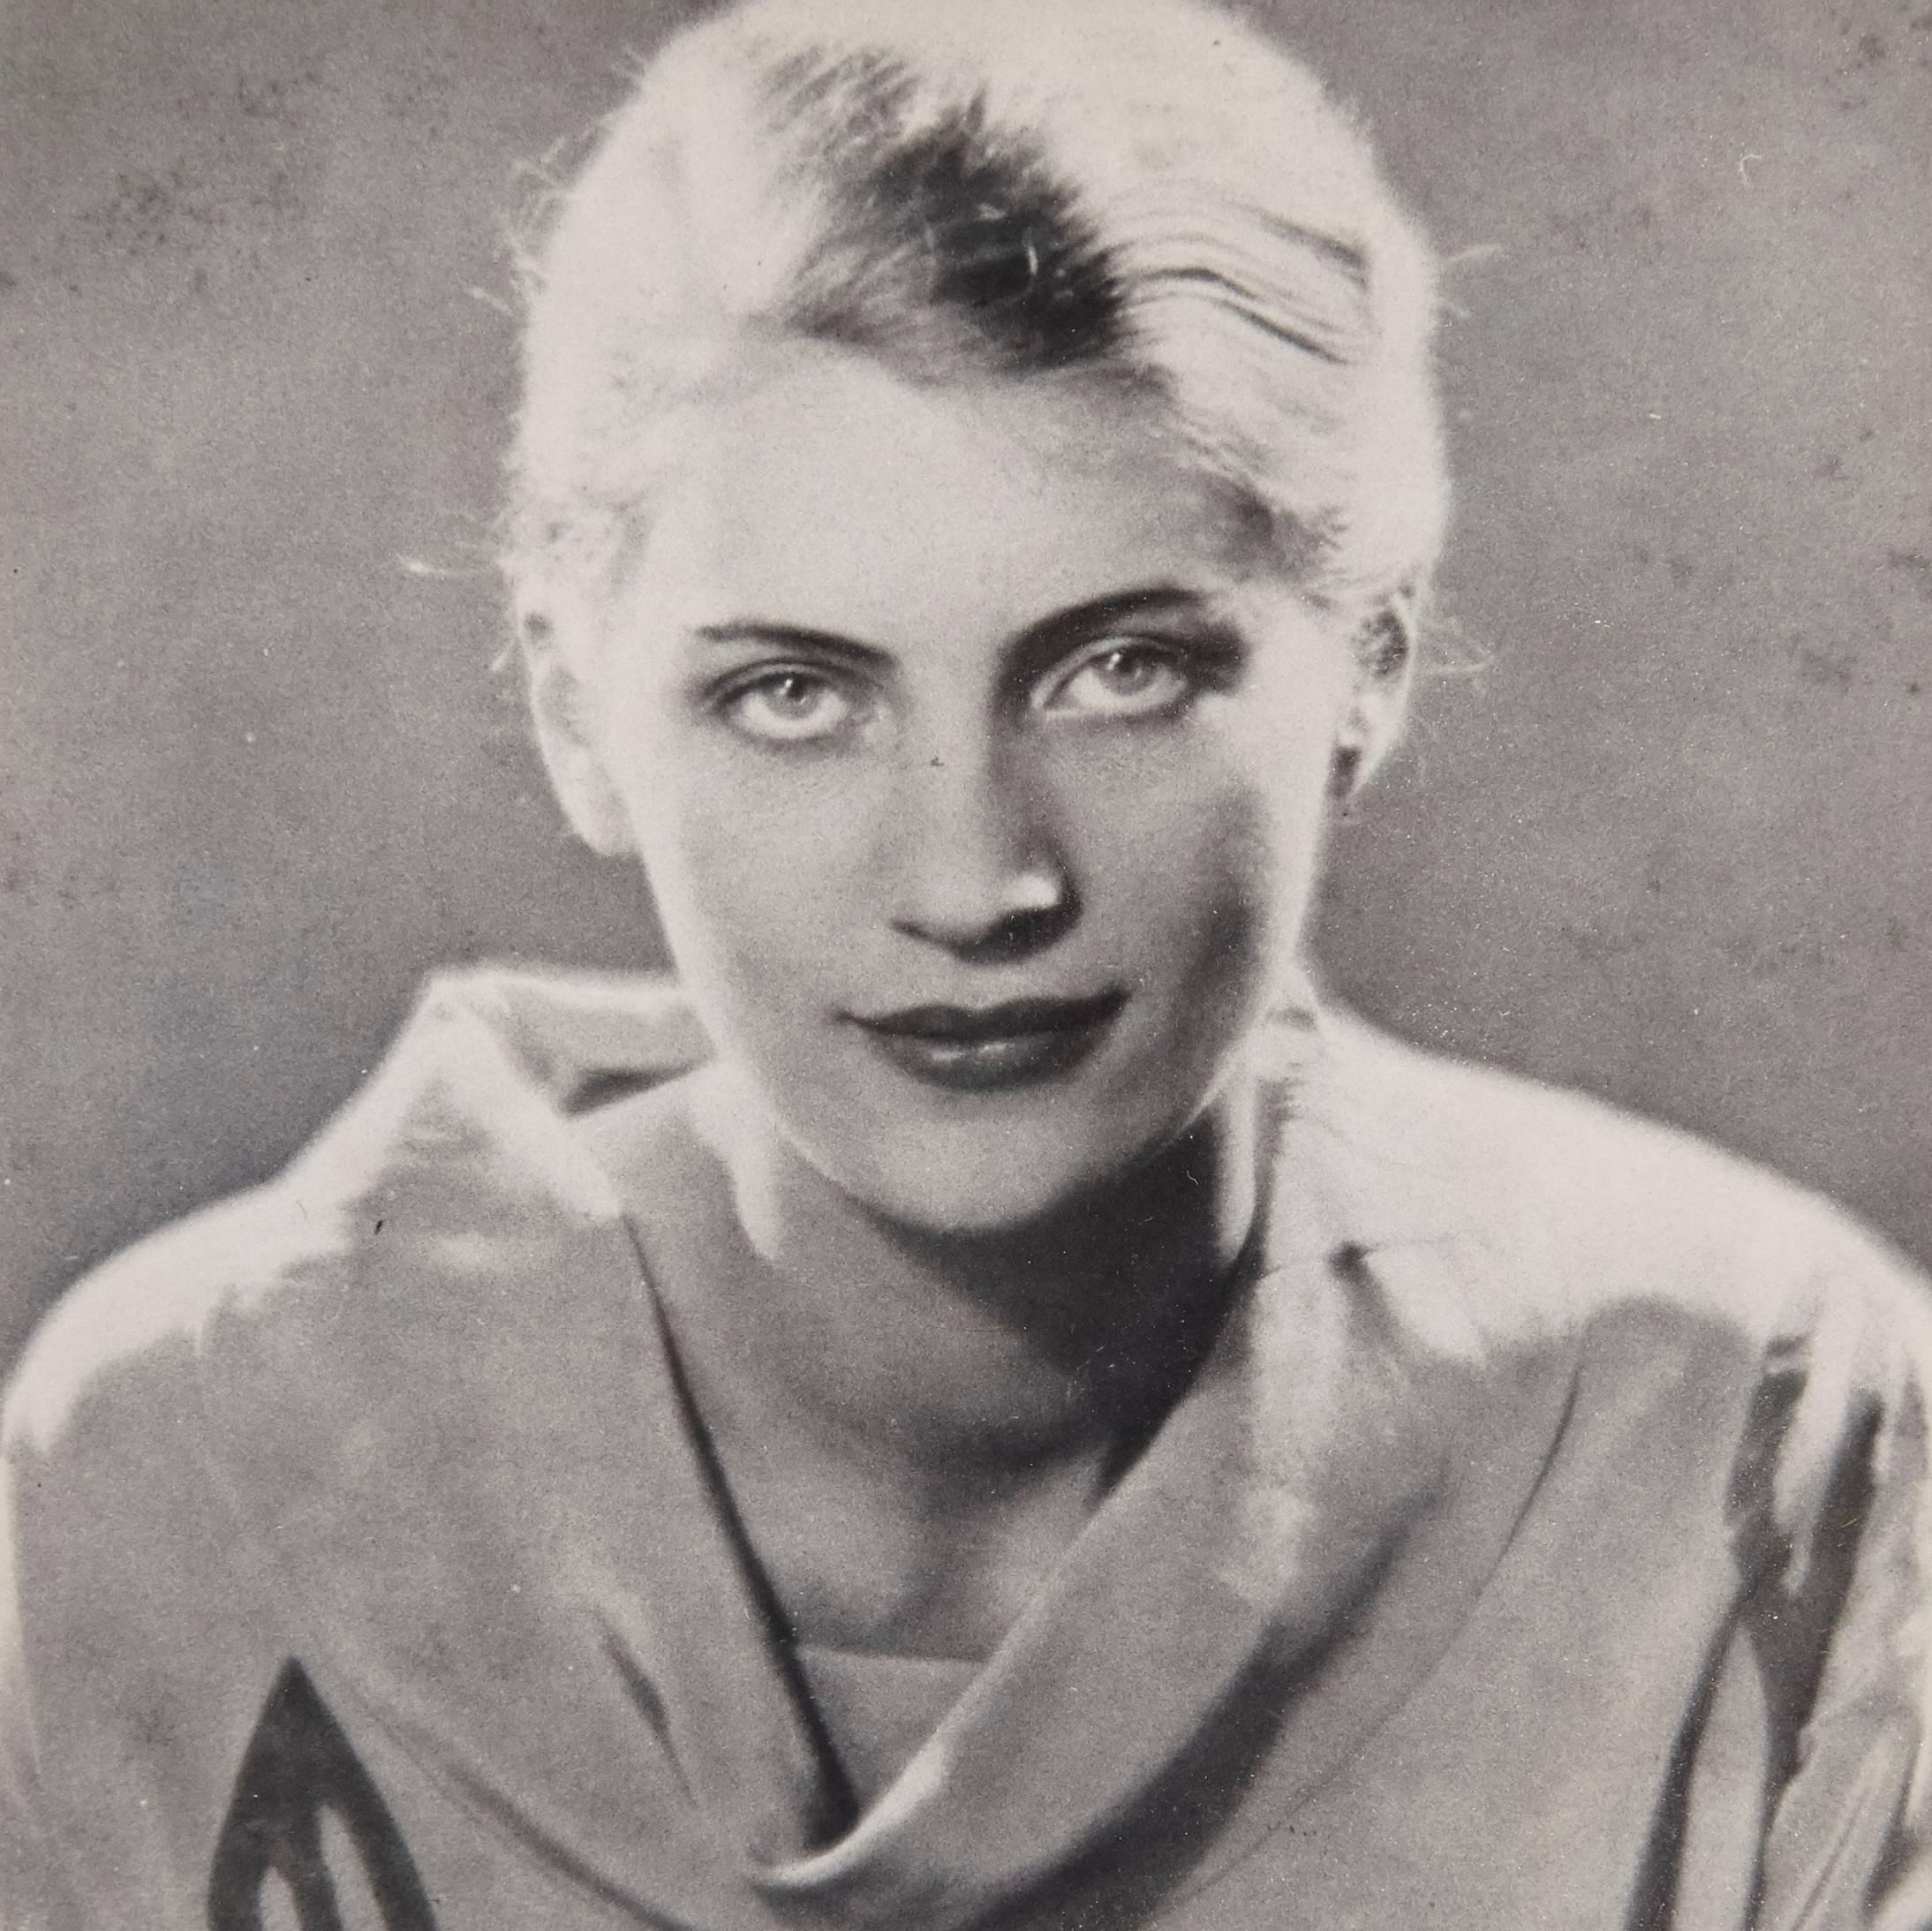 Portrait of Lee Miller photographed by Man Ray, circa 1930.

A posthumous print from the original negative by Pierre Gassmann, circa 1970.

Framed in a 19th century frame.

Born (Philadelphia, 1890-Paris, 1976) Emmanuel Radnitzky, Man Ray